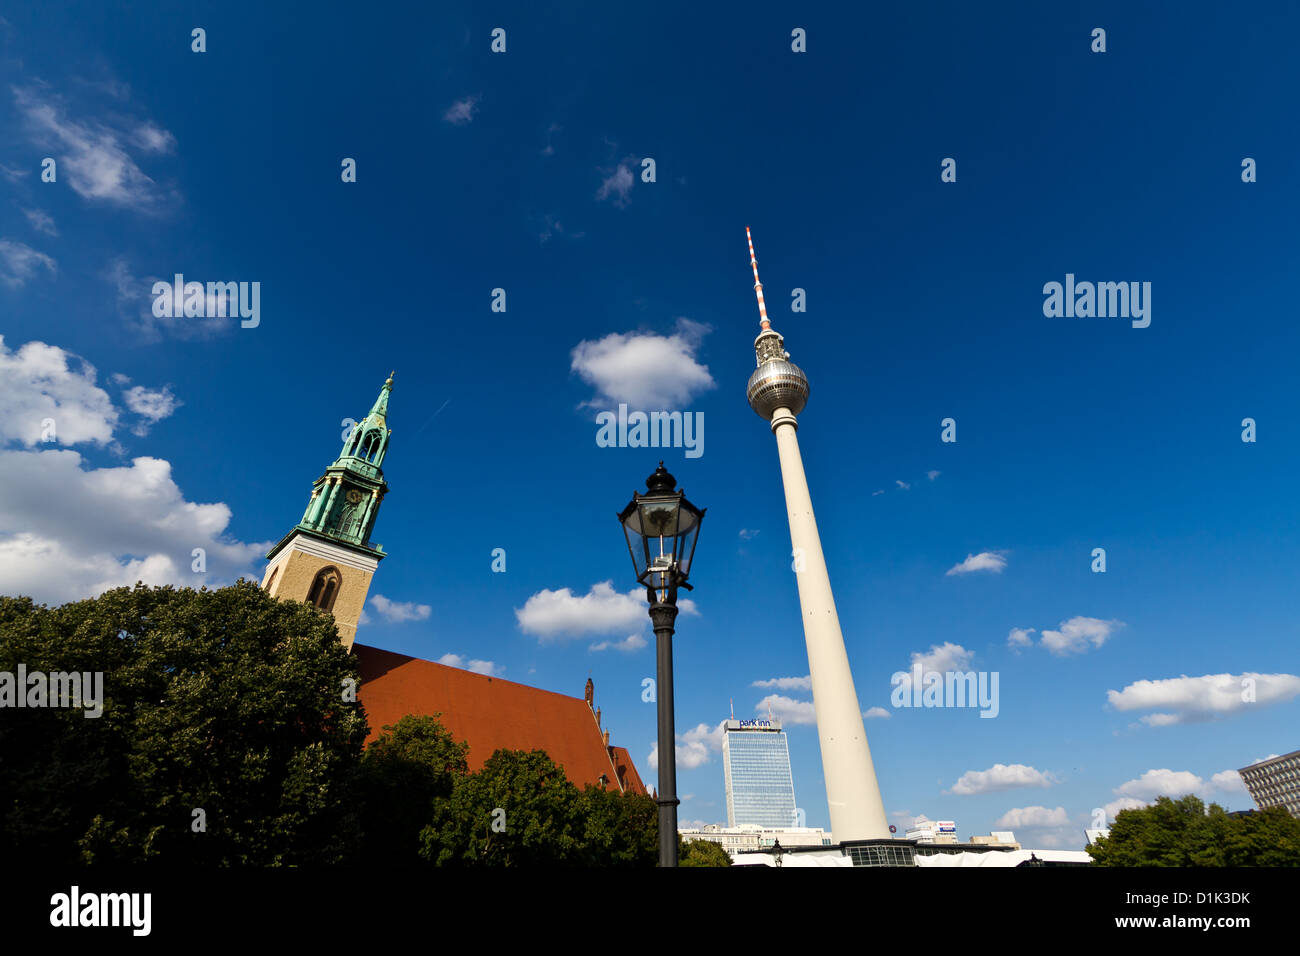 St. Mary's Church and the Television Tower on Alexanderplatz in Berlin, Germany Stock Photo